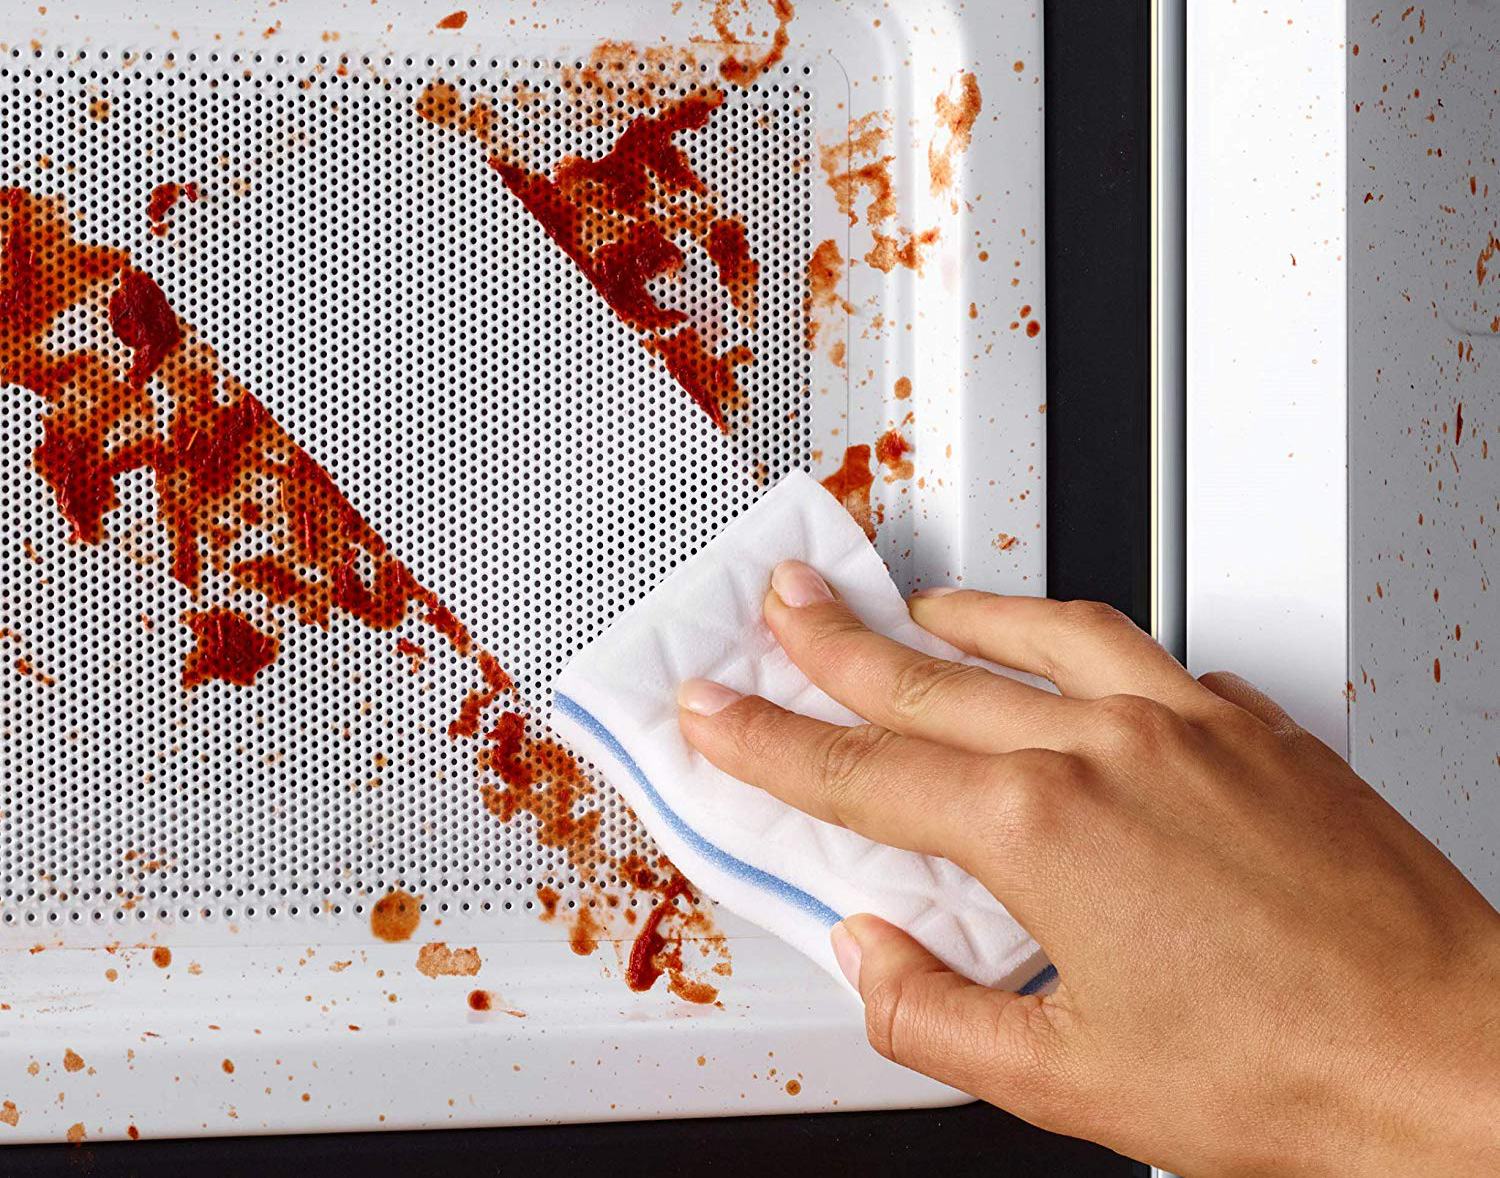 Hand wiping tomato sauce off of microwave 